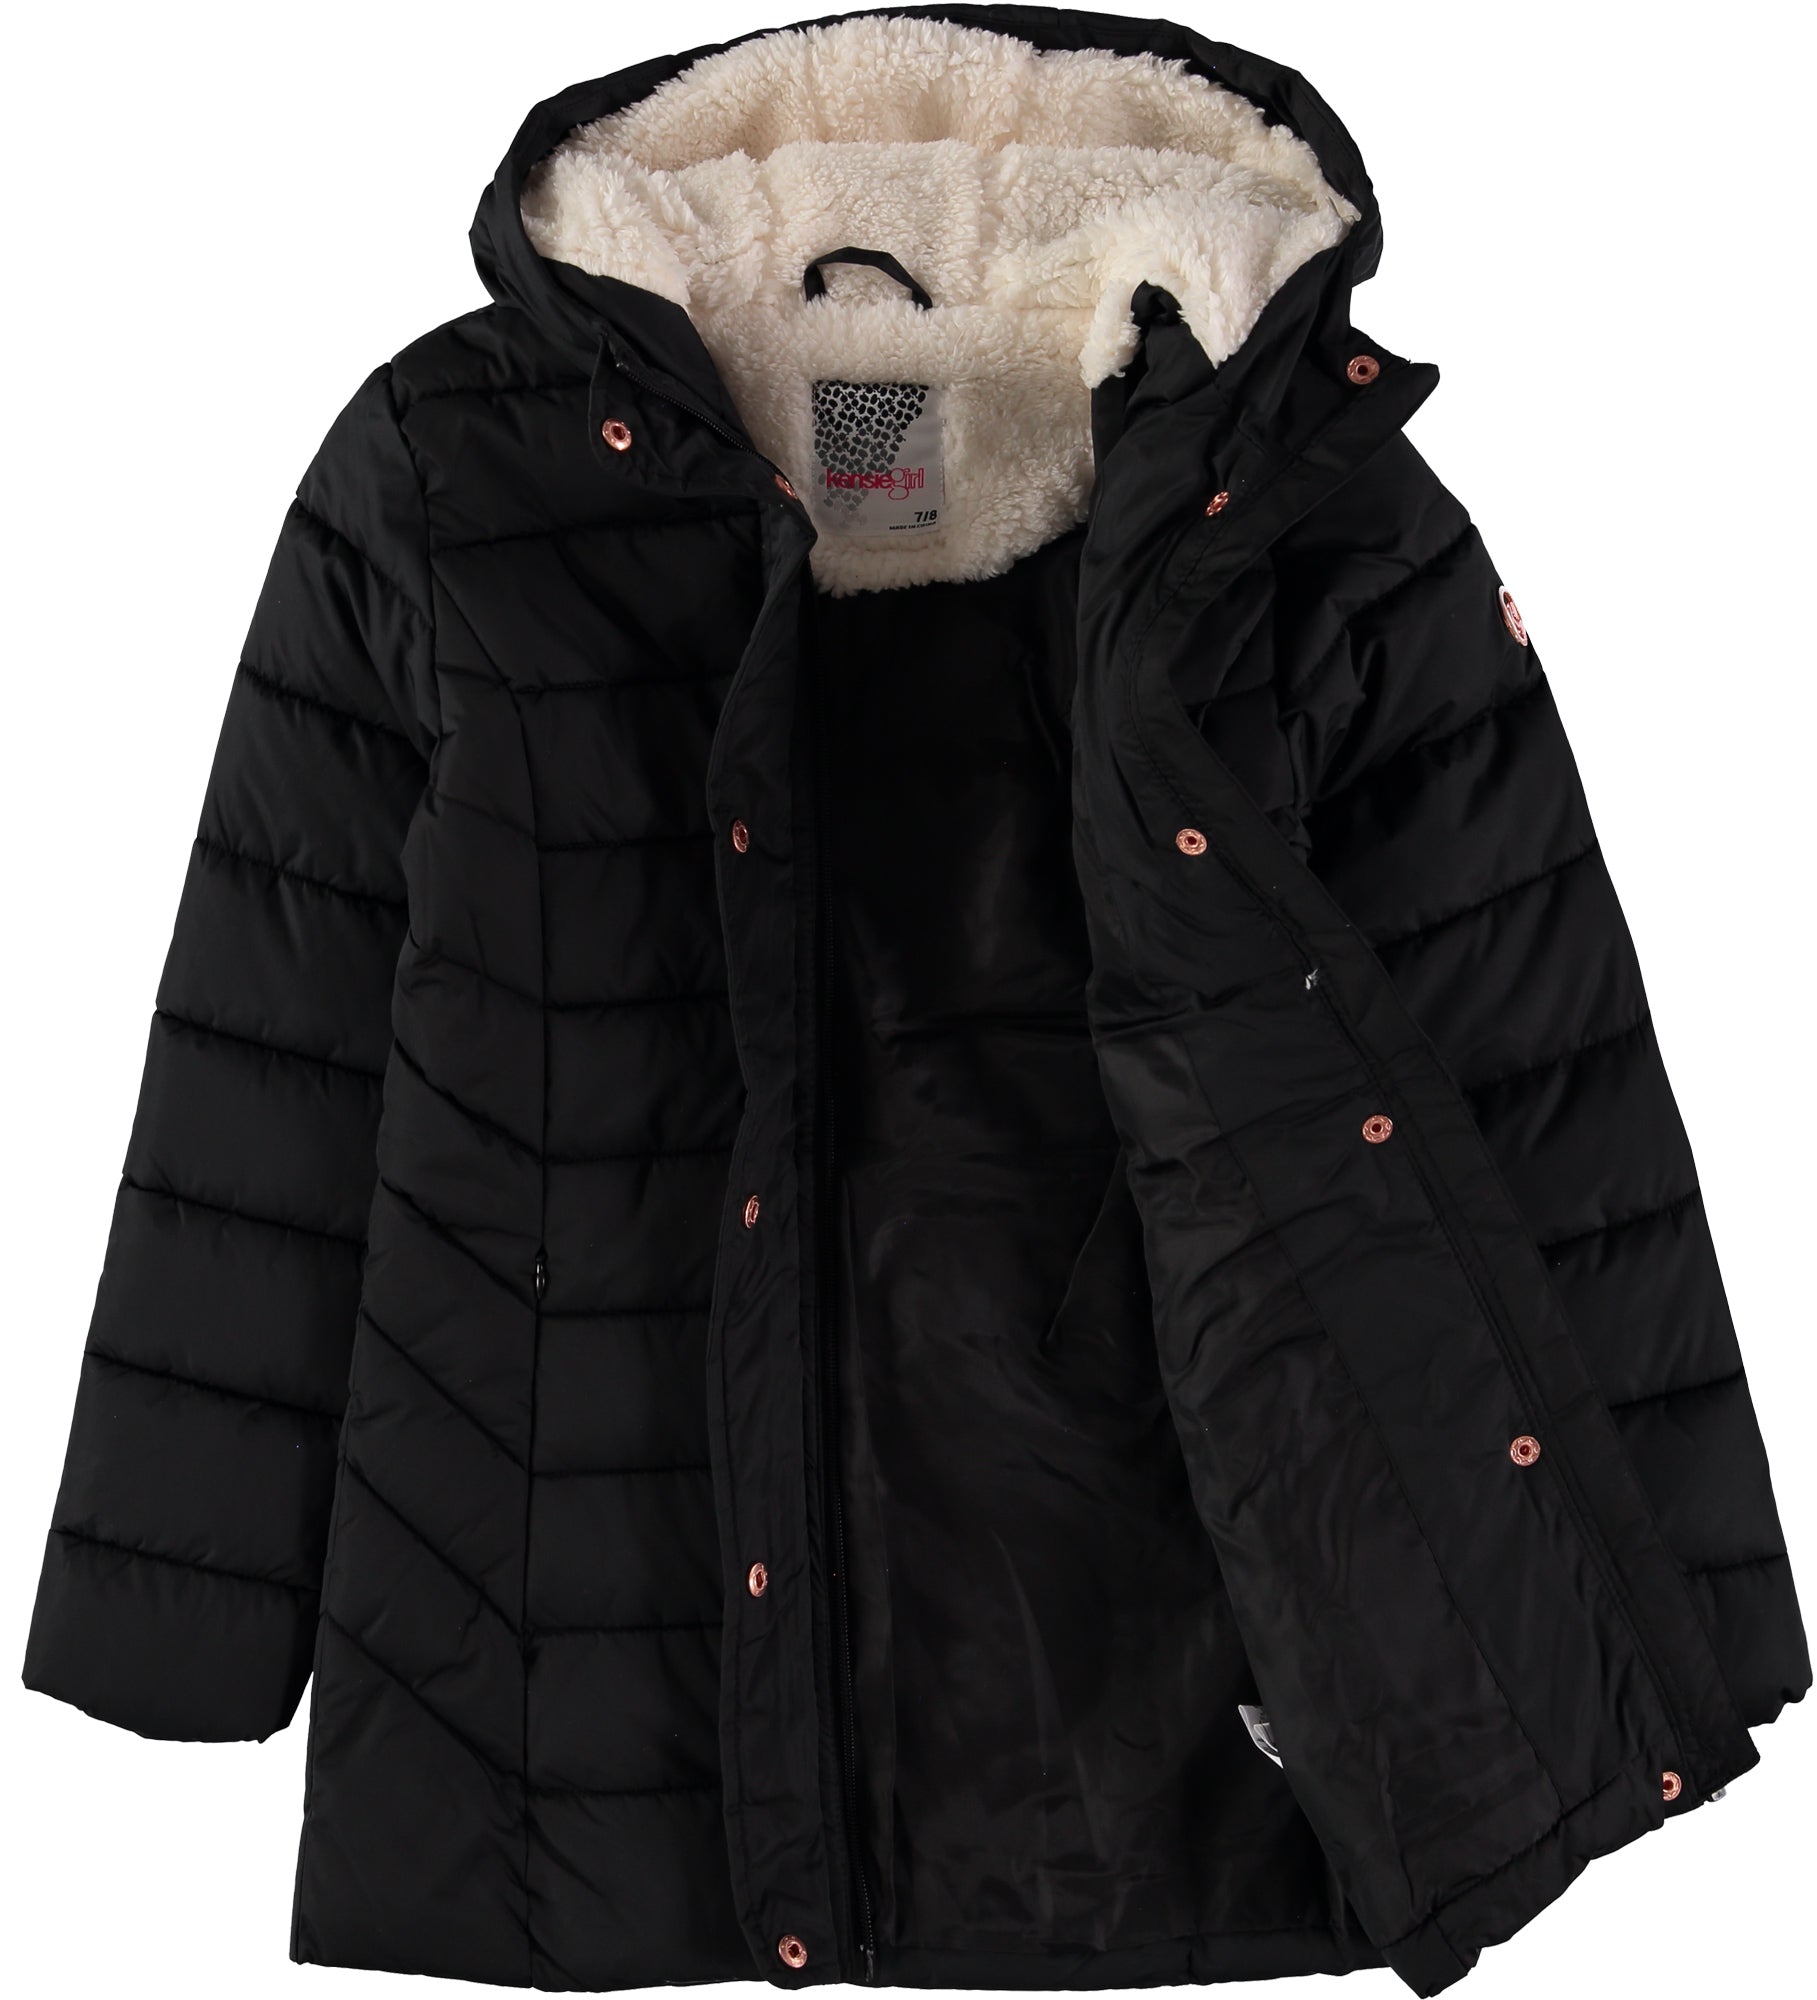 KensieGirl 7-16 Mid Length Quilted Puffer Jacket with Hood